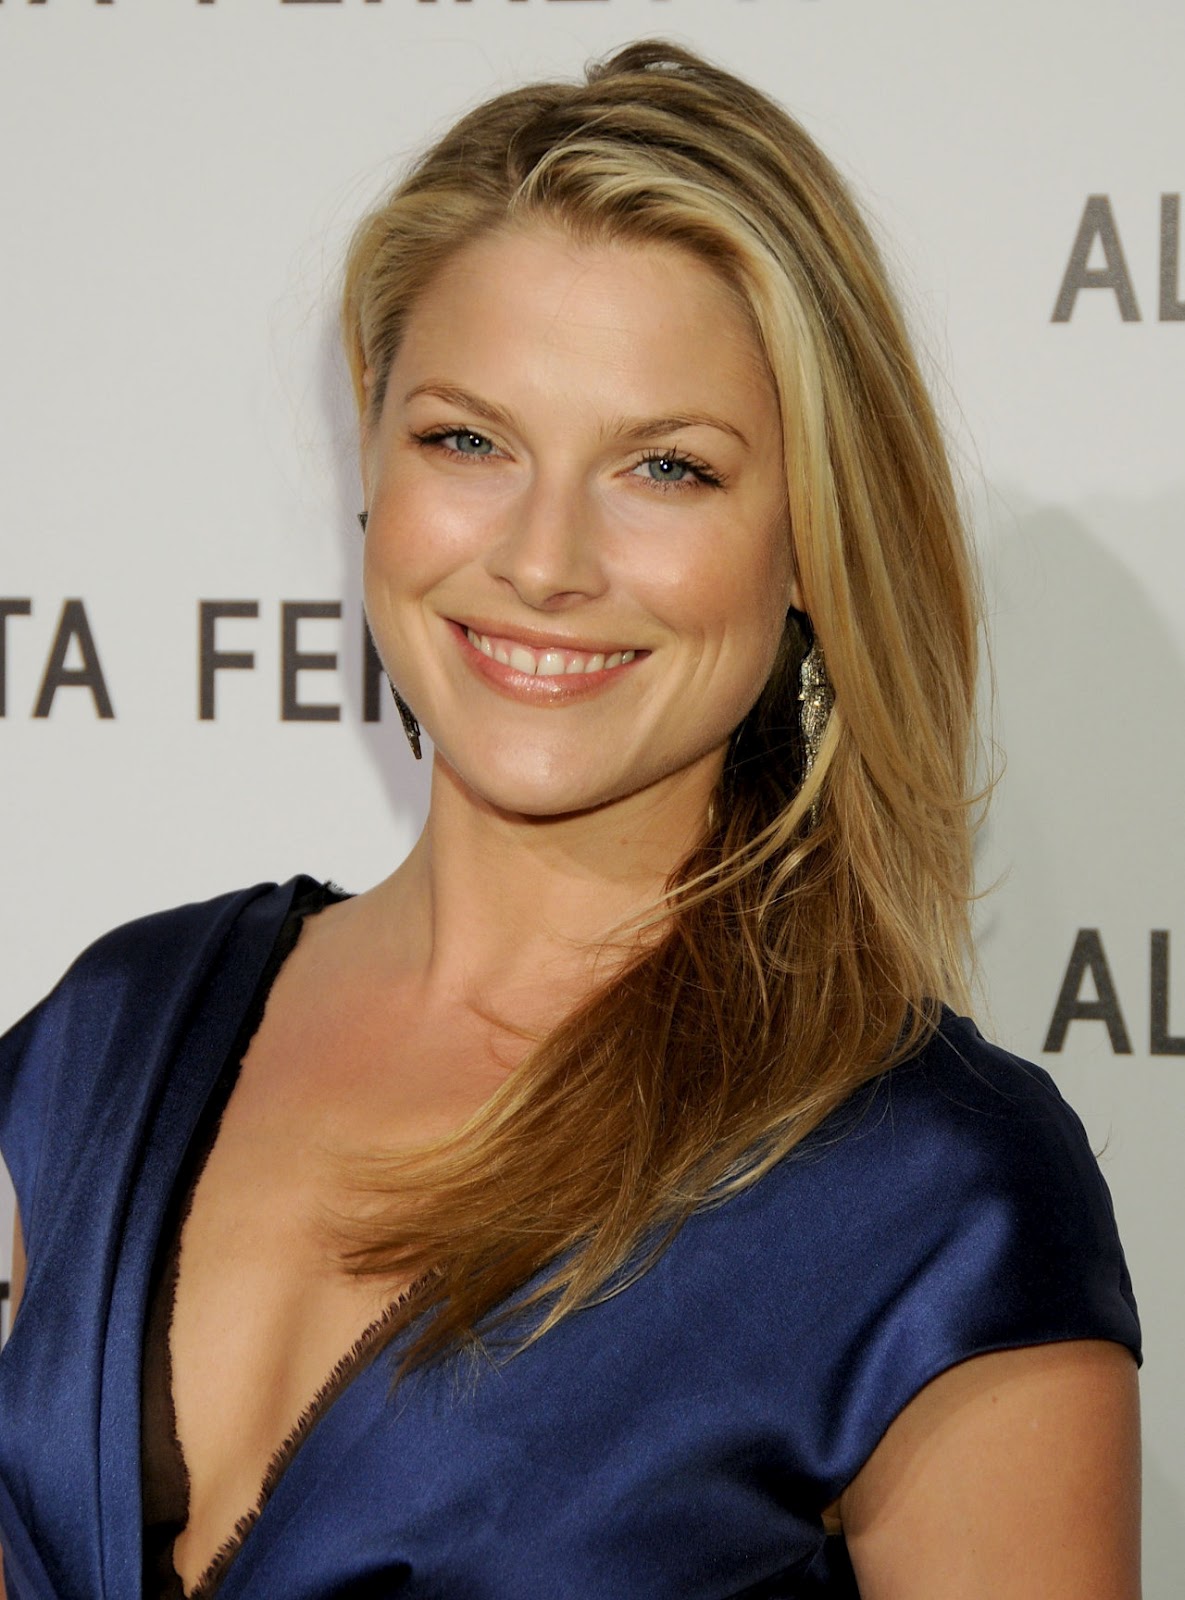 ALL ABOUT HOLLYWOOD STARS: Ali Larter Profile and Pics